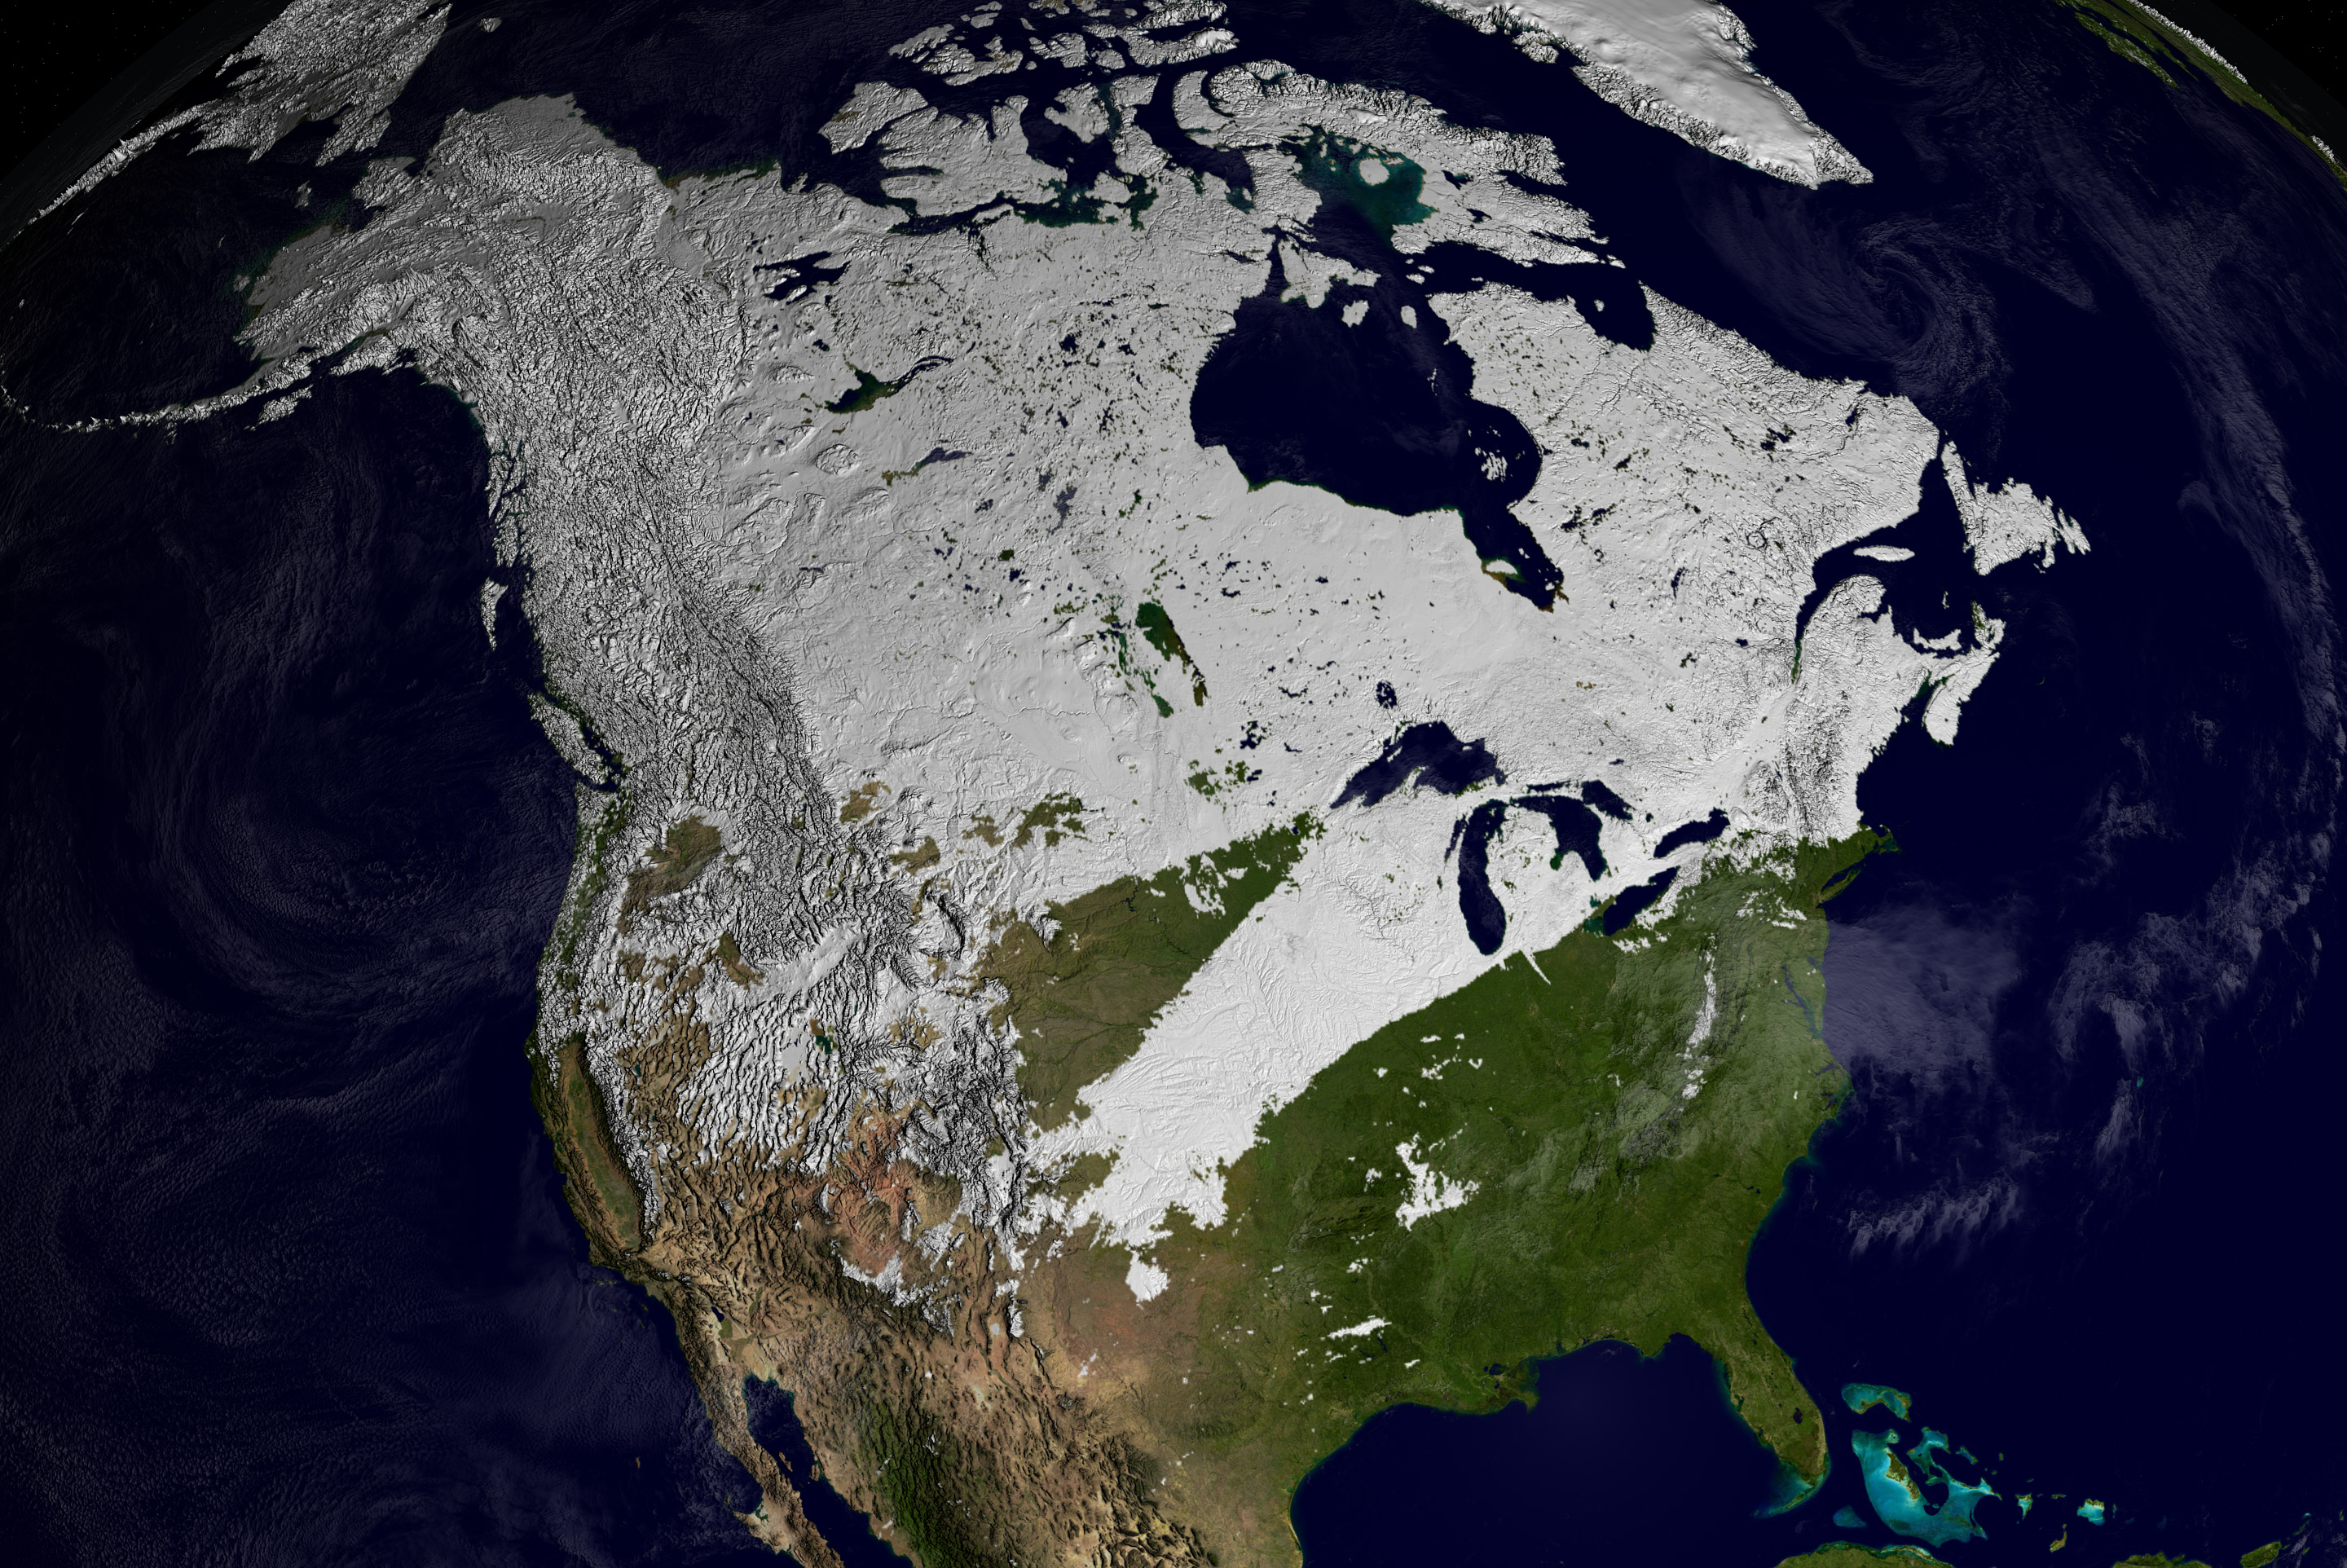 Winter Snow Cover in the Northern Hemisphere : Image of the Day